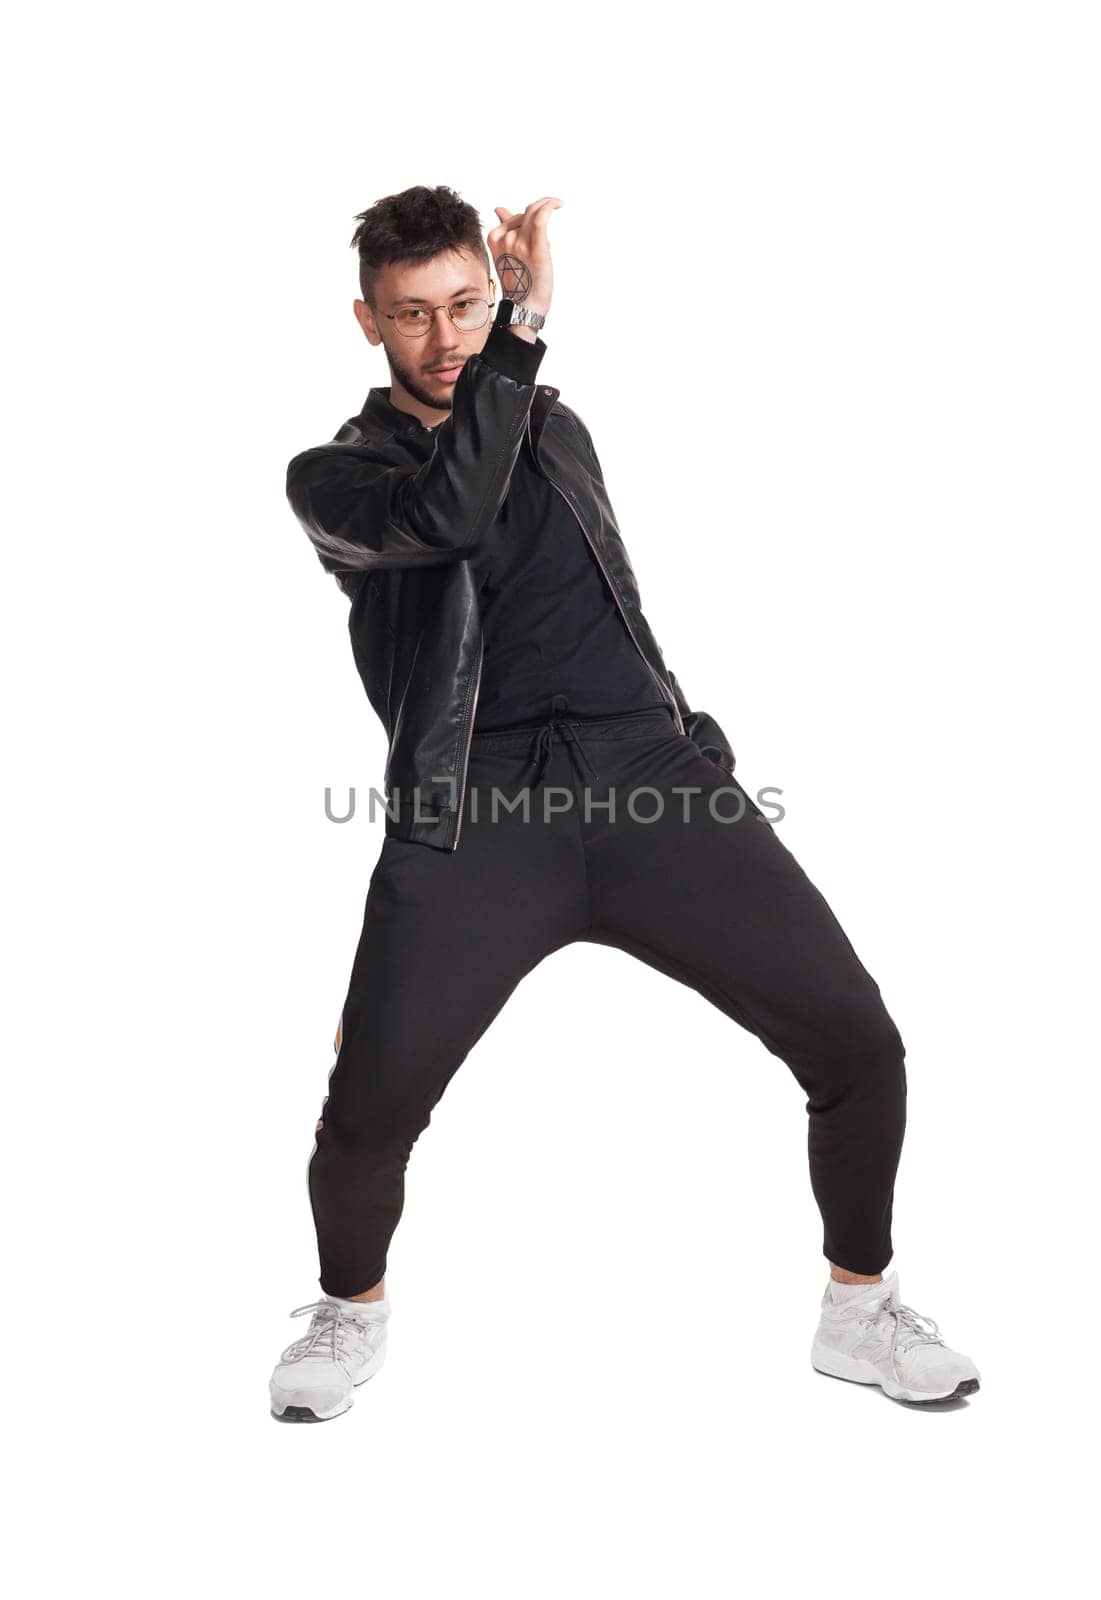 Full-length photo of a modern performer in glasses, black leather jacket, t-shirt, sports pants and light sneakers fooling around in studio. Indoor photo of a good-looking man dancing and looking at the camera isolated on white background. Music and imagination.